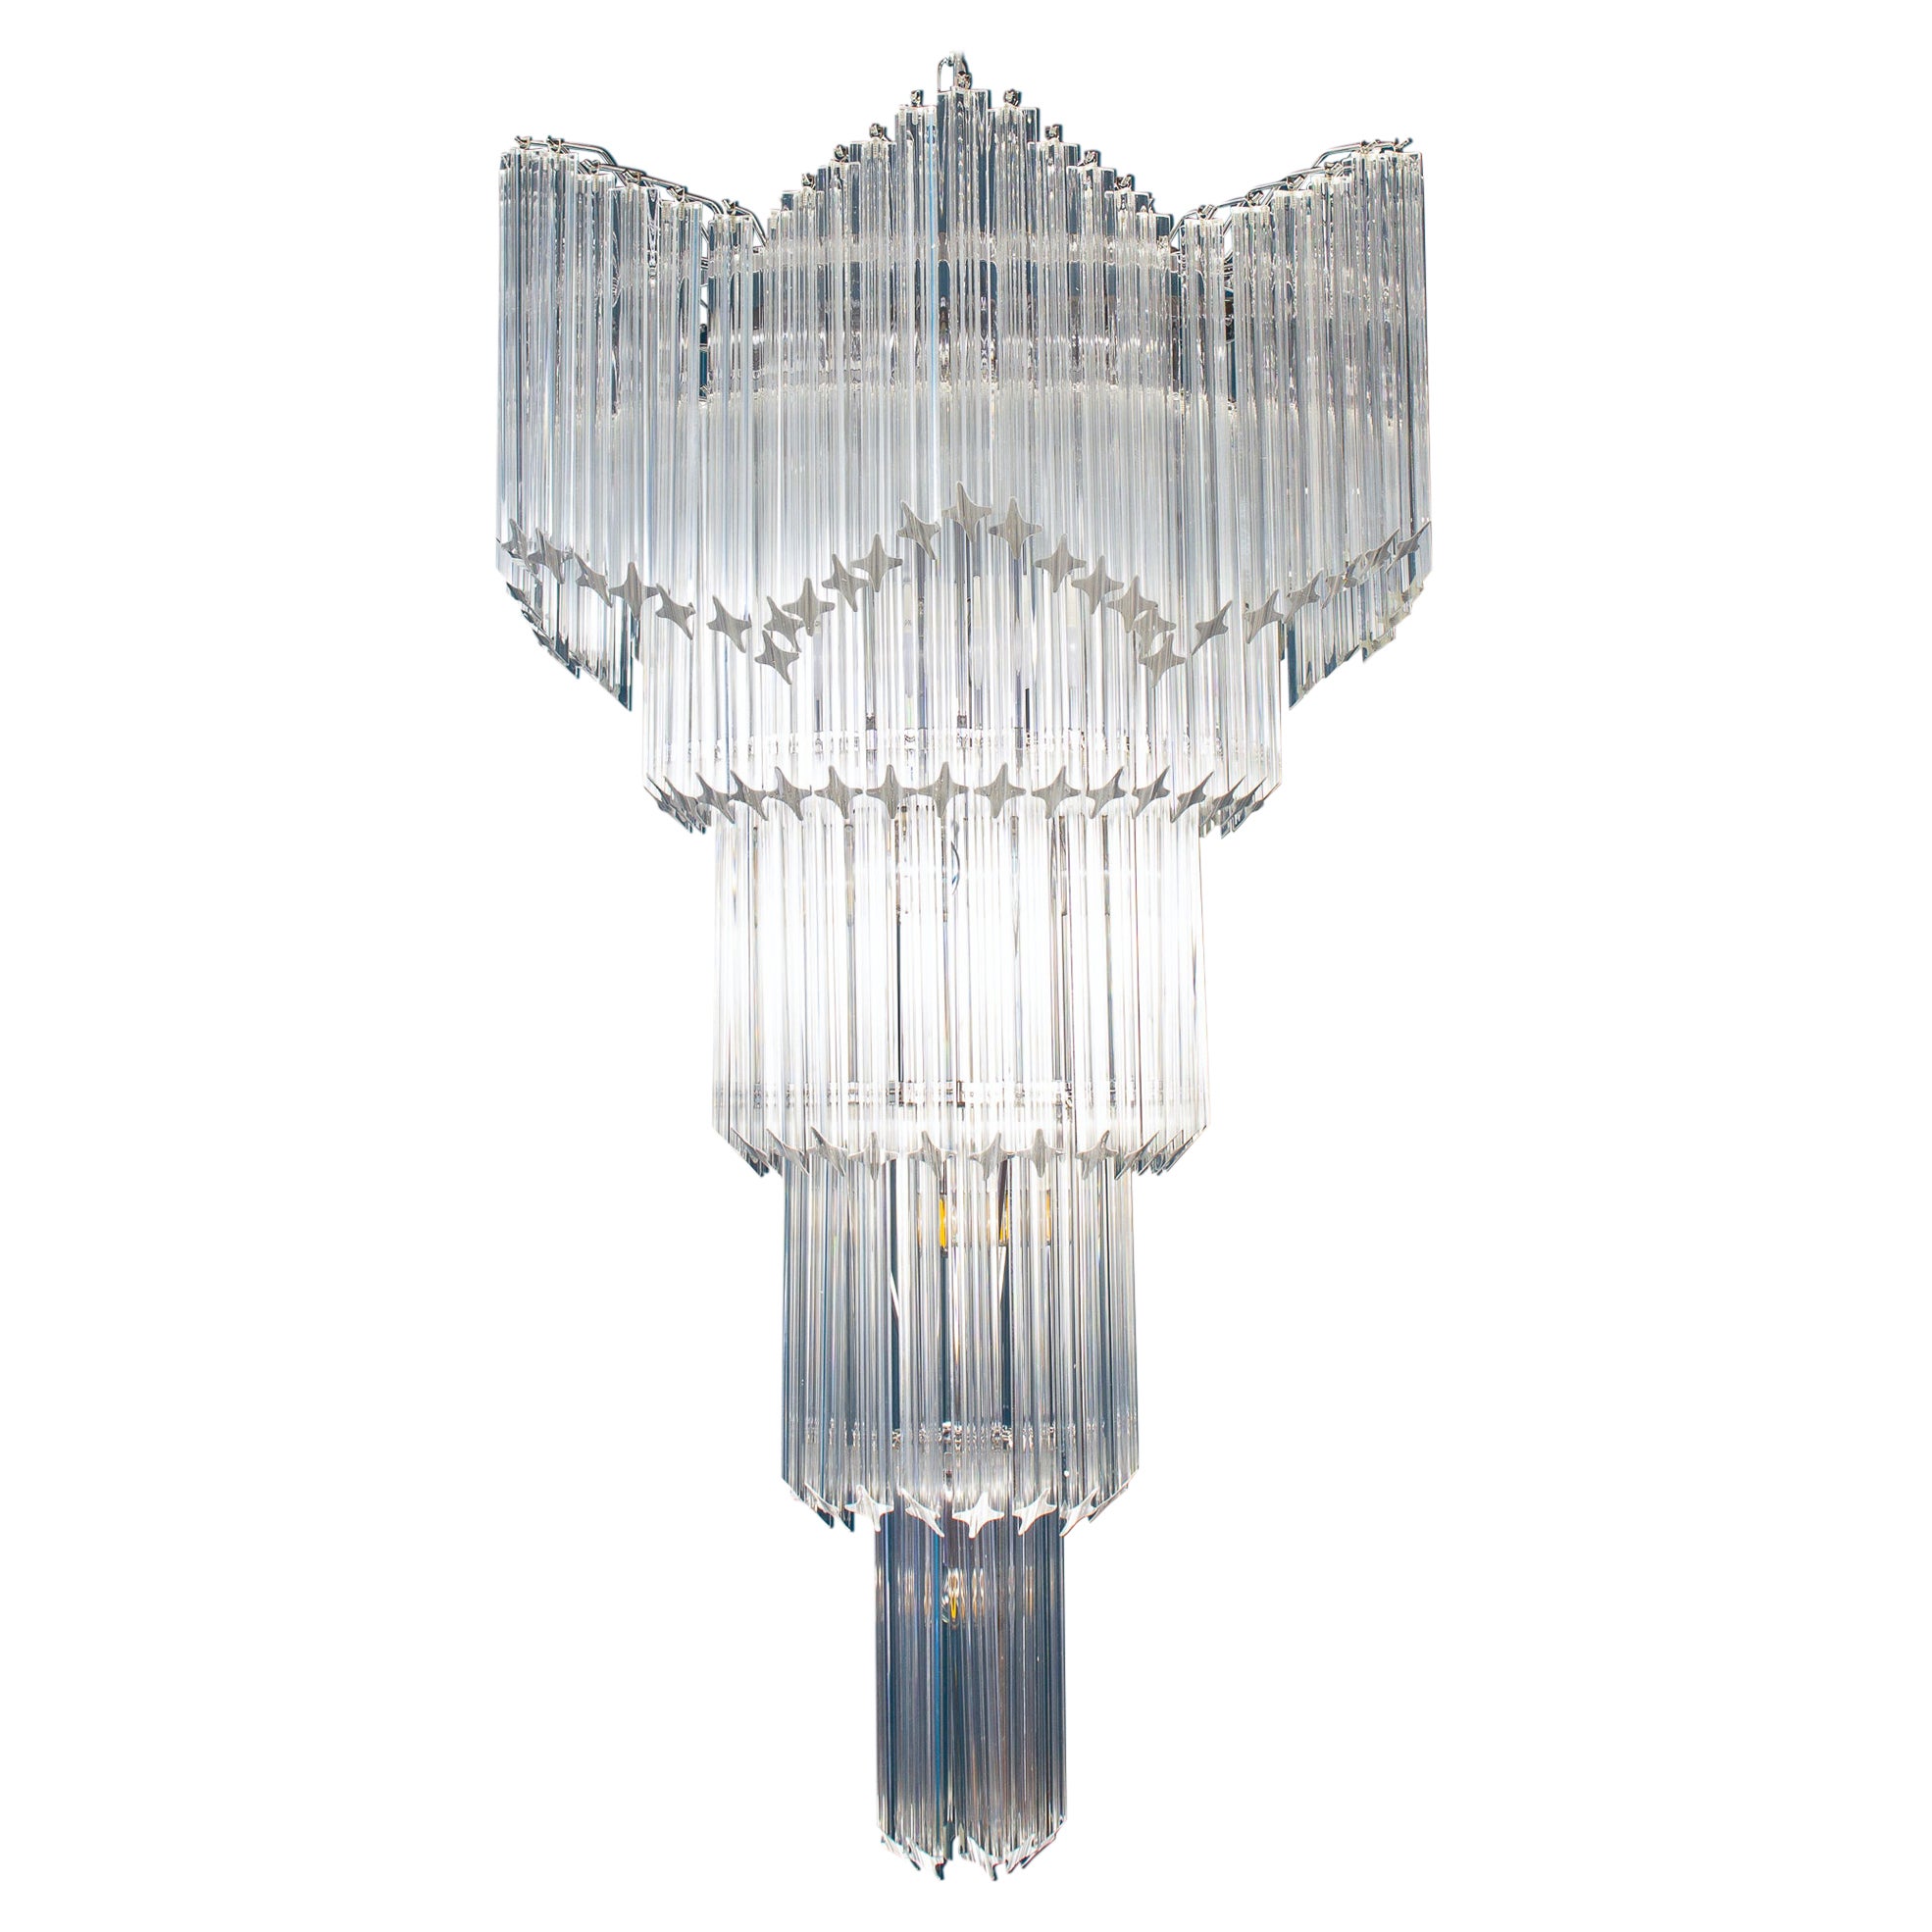 Huge multitier triedi crystal prism chandelier.
Price is for 1 item.
Available also a pair.

Measures: Height
120 cm glass + 30 cm chain = total height 150 cm.
Diameter 70 cm.